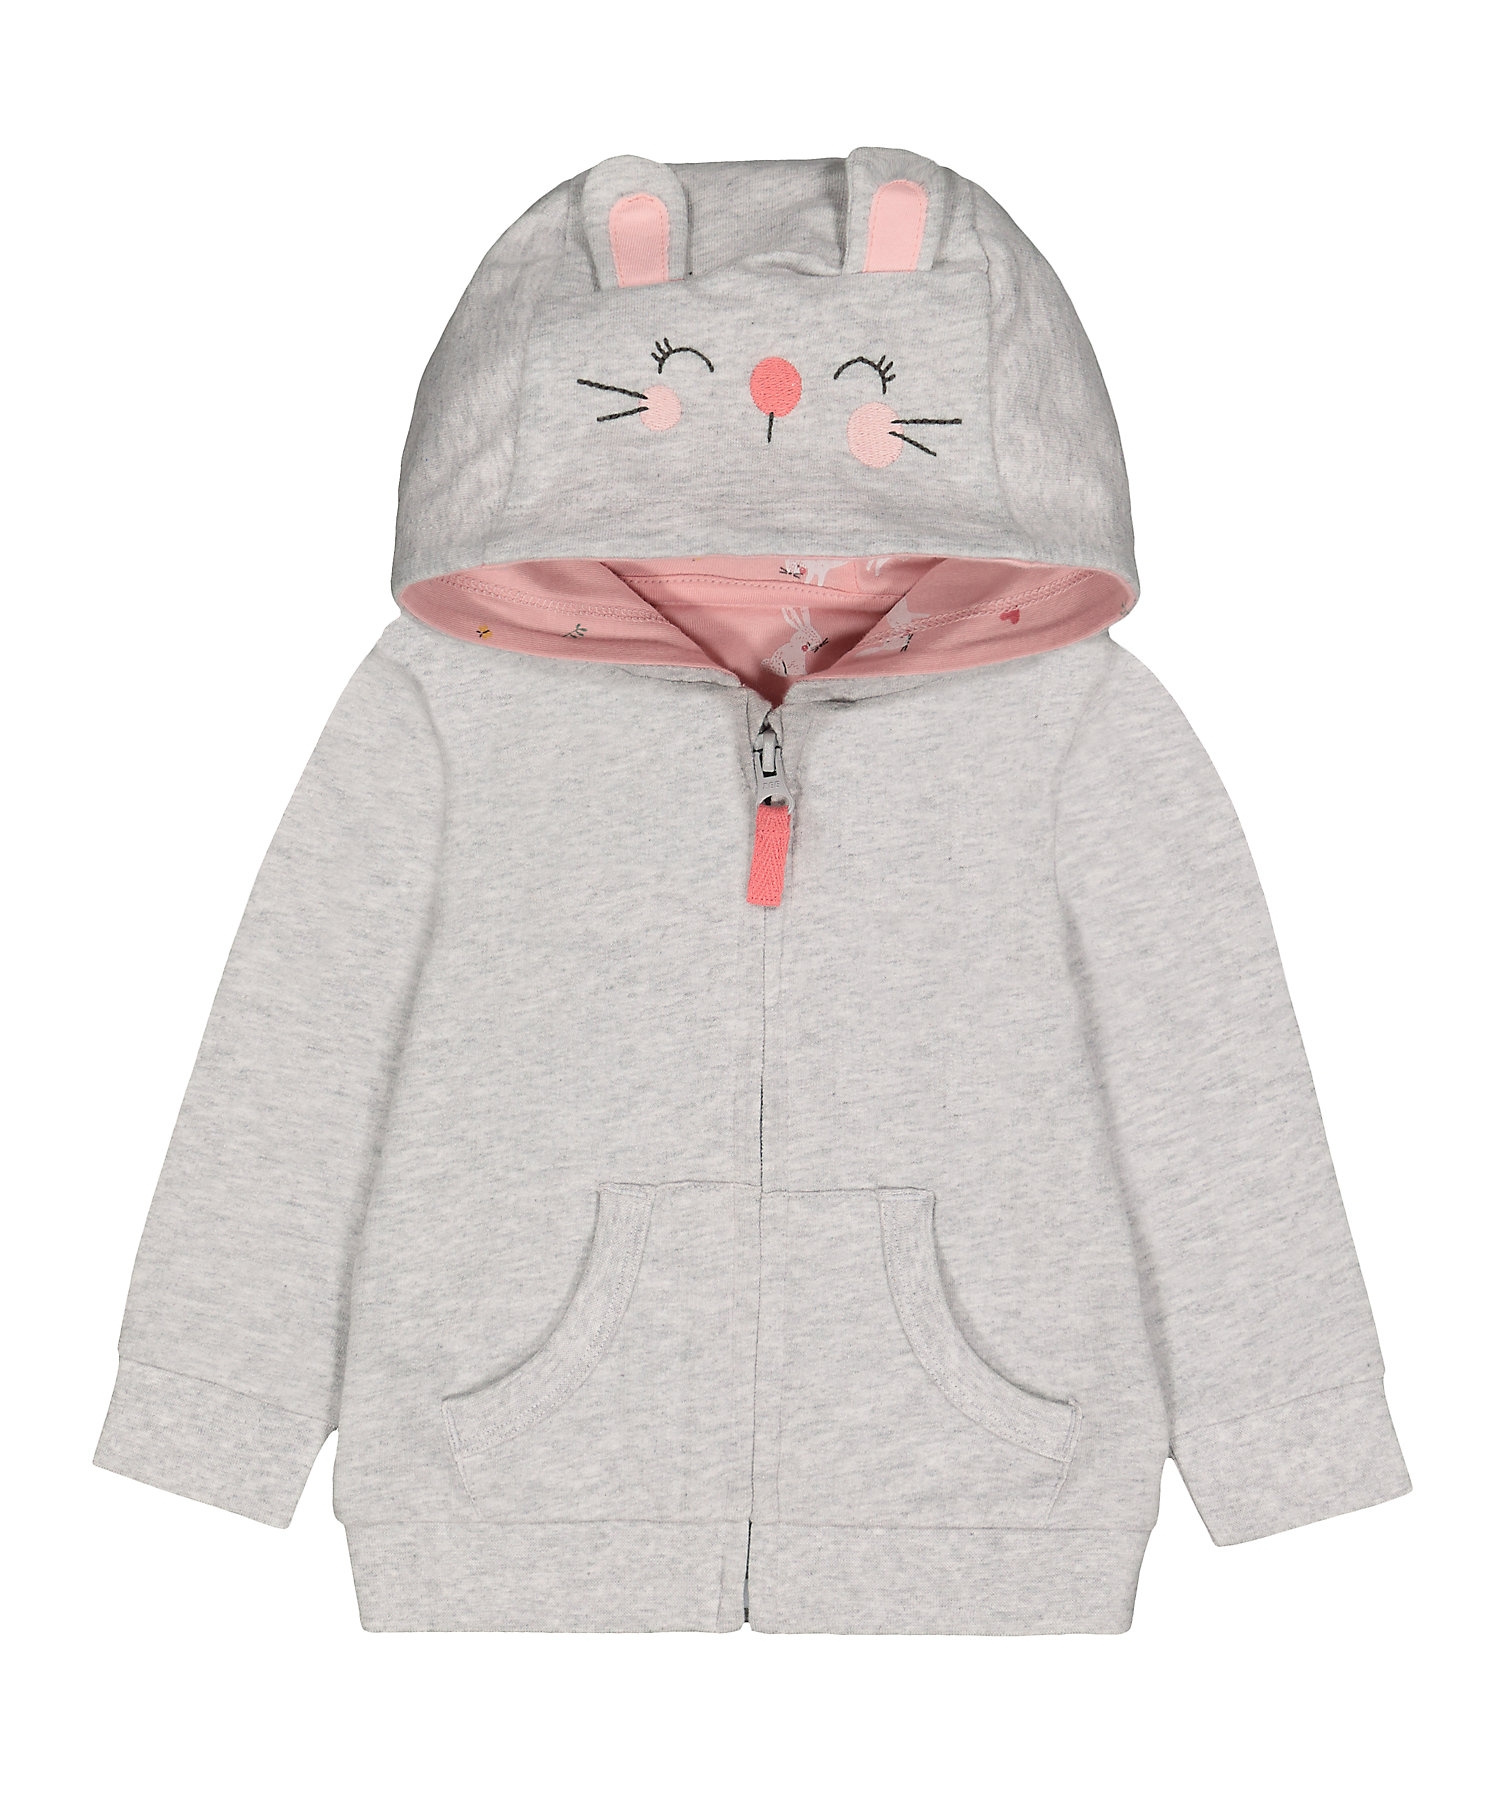 Mothercare | Girls Full Sleeves Hooded Sweatshirt Bunny Embroidery And 3D Ear Details - Grey